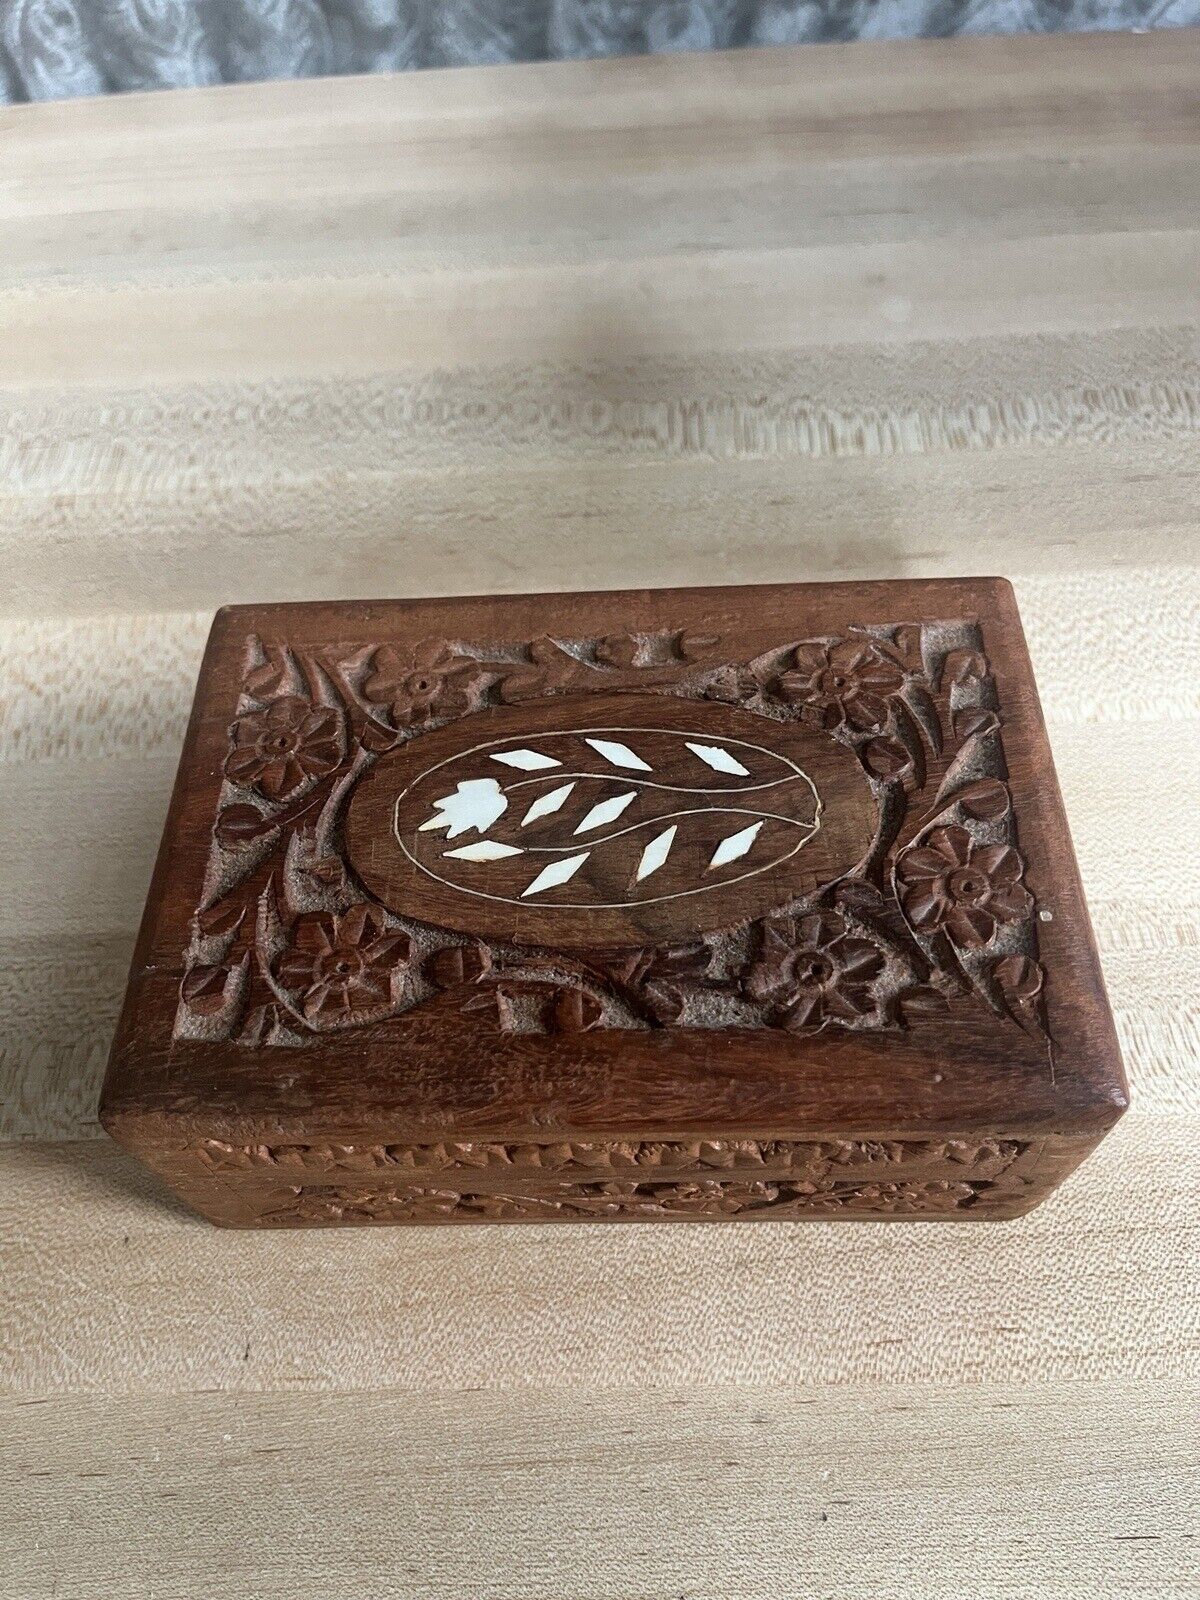 Vintage Jewelry Trinket Box Hand Carved Wooden Black Made in India 6” x 4” x 2”